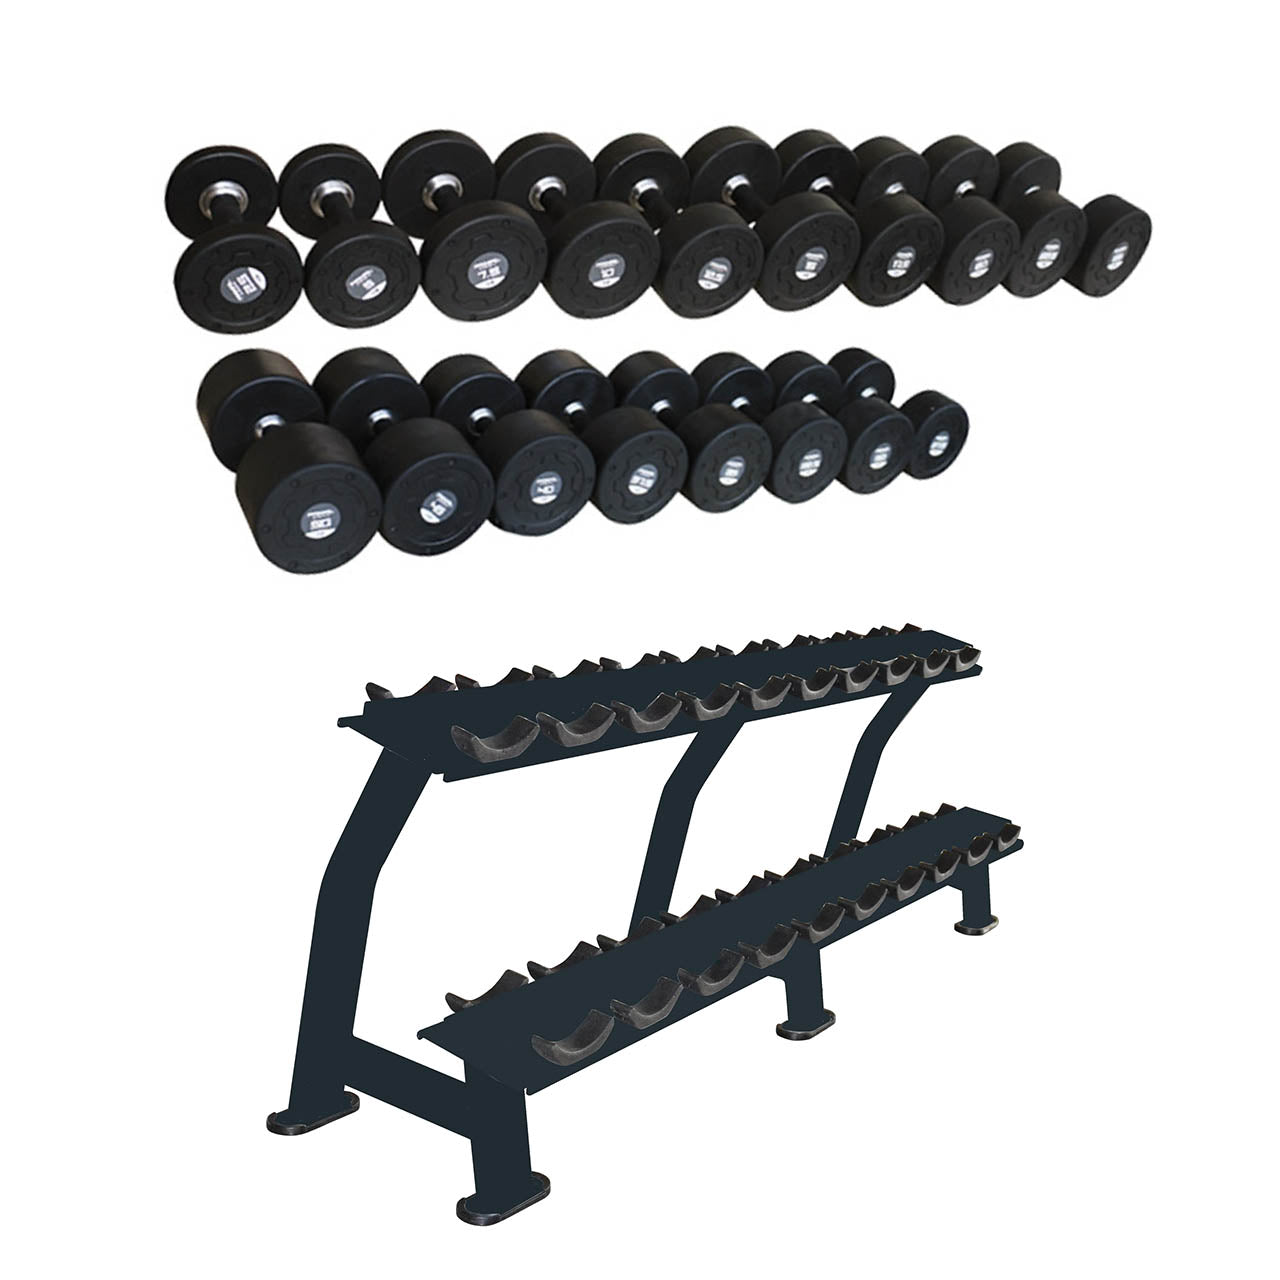 Primal Pro Series Rubber Nero Stainless Steel Handle Dumbbells 27.5kg-50kg Package (10 Pairs) with Dumbbell Rack